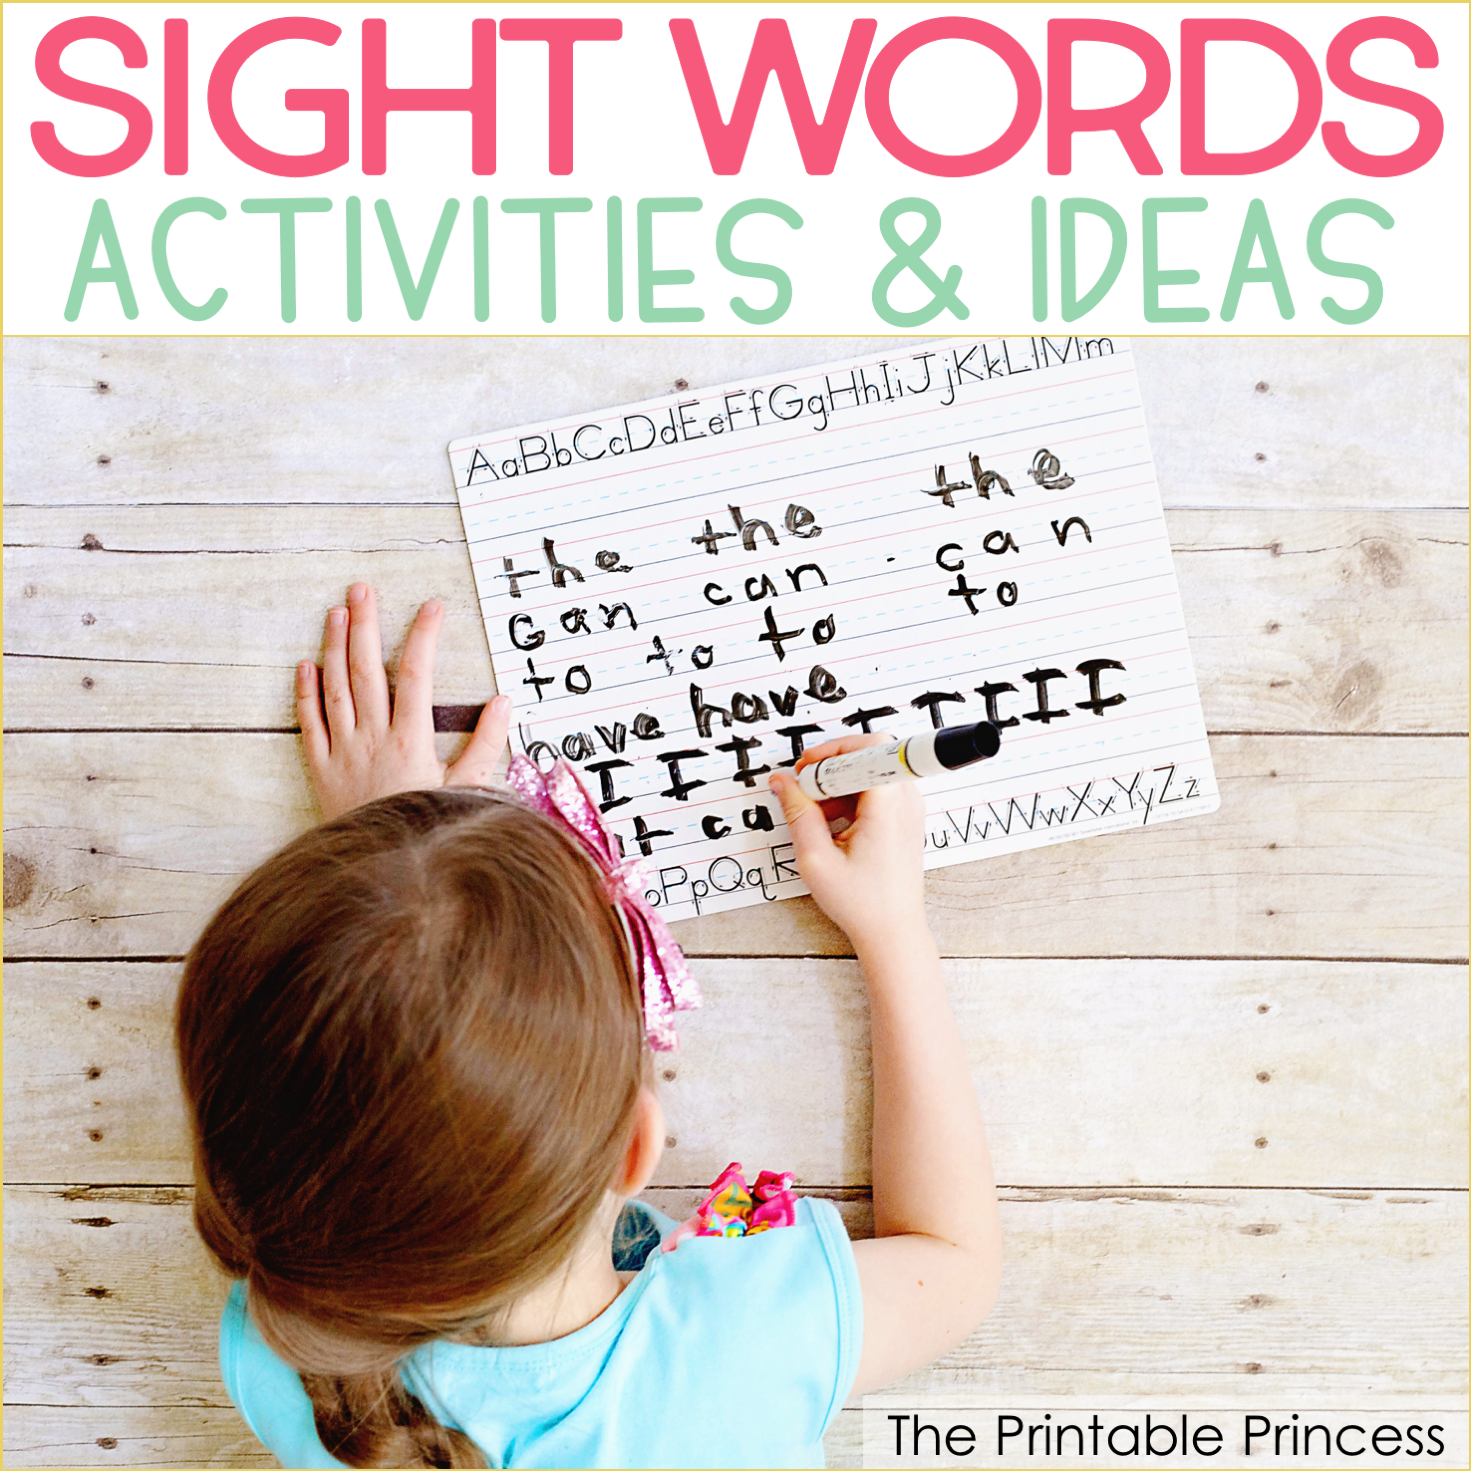 What Are Sight Words and Why Are They Important?